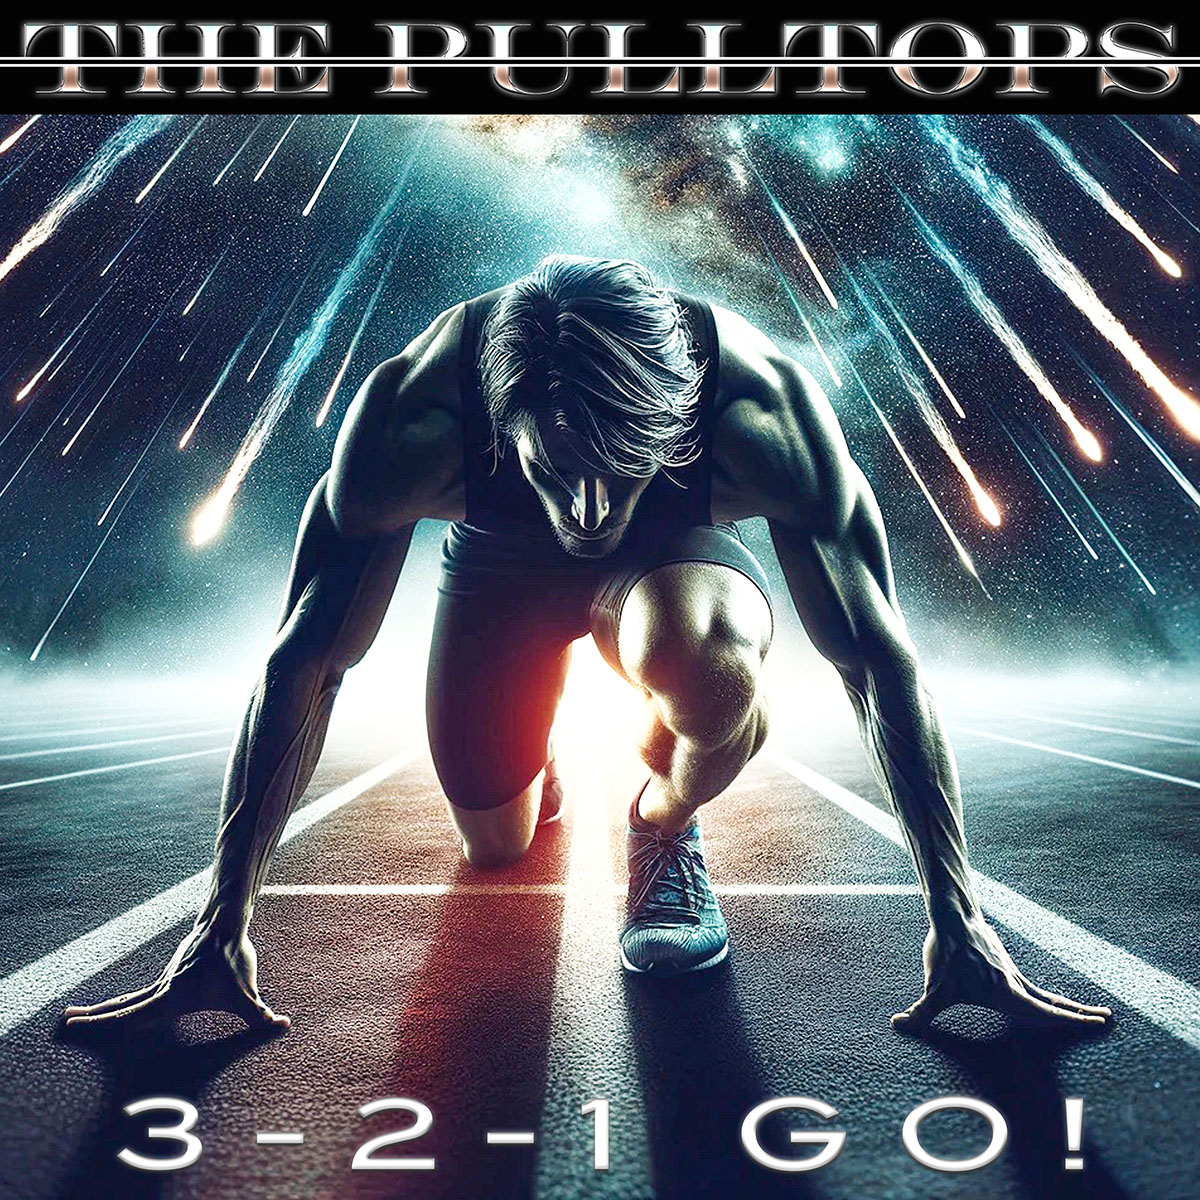 The Pulltops – “3-2-1 Go!”